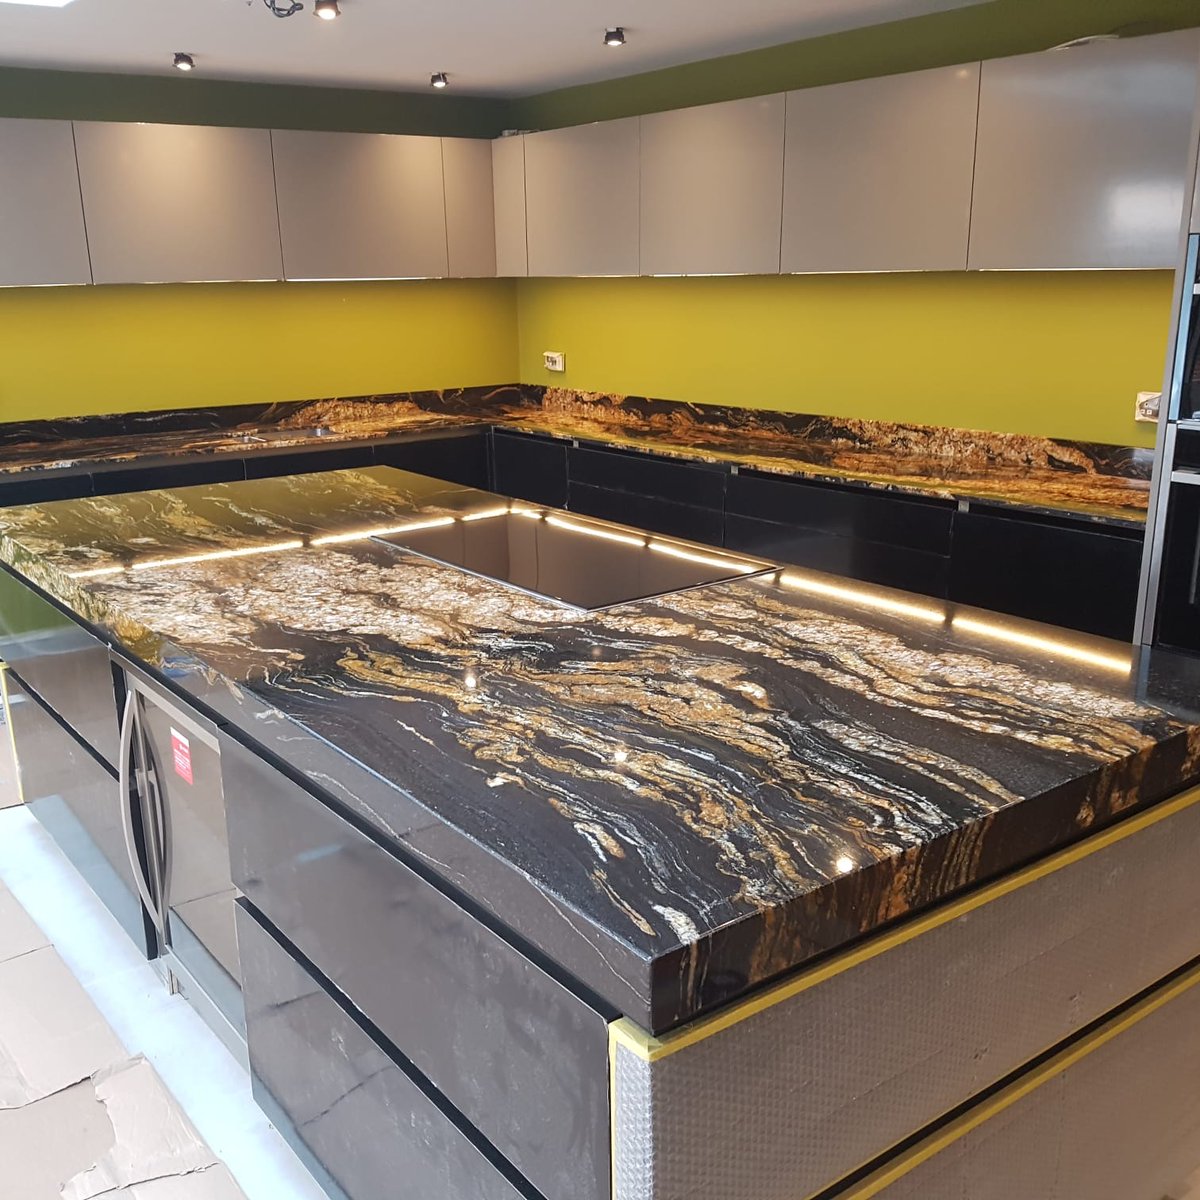 These are some of the beautiful worktops that we at GKS have installed in the past in a range of different worktop materials. 😎 #Granite #Quartz #Neolith #worktops #kitchen #kitchendesigners #kitchenshowrooms #Stonefabricators #gks